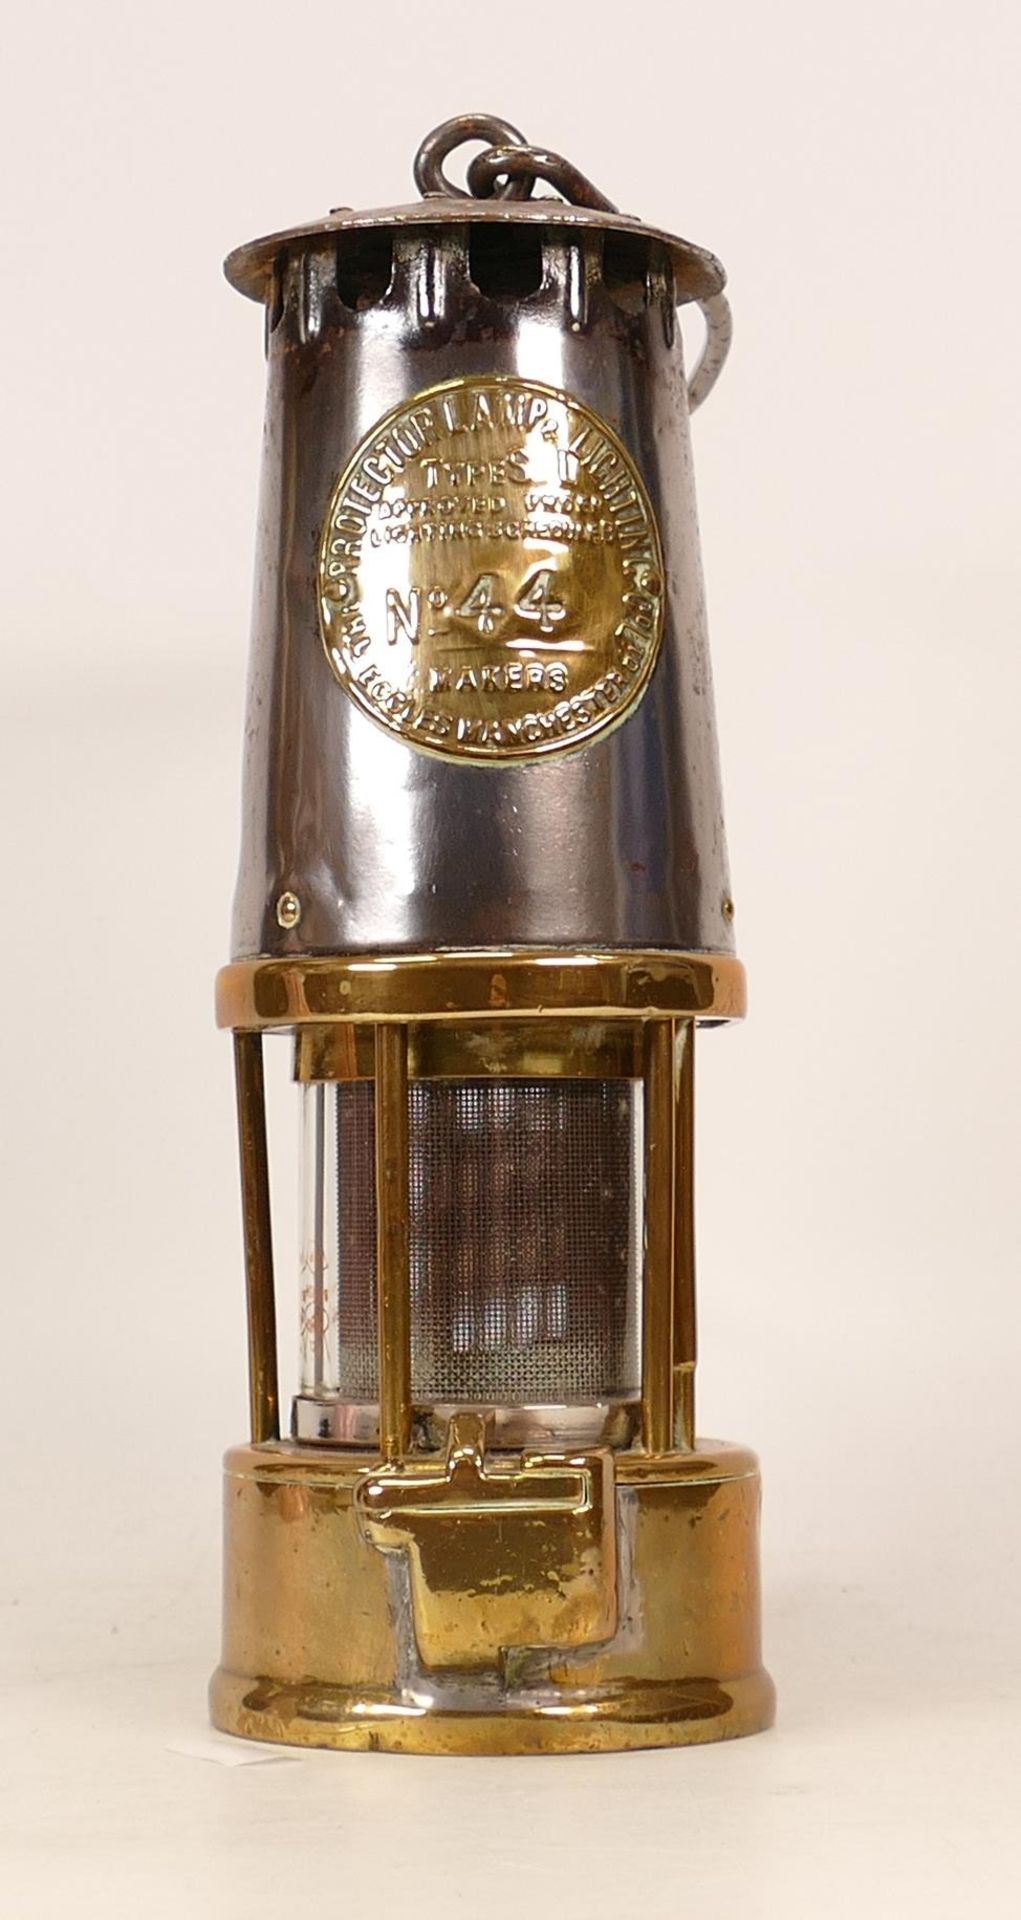 No. 44 Eccles Manchester Co. Ltd. Protector Lamp & Lighting Type S L. Height: 24.5cm